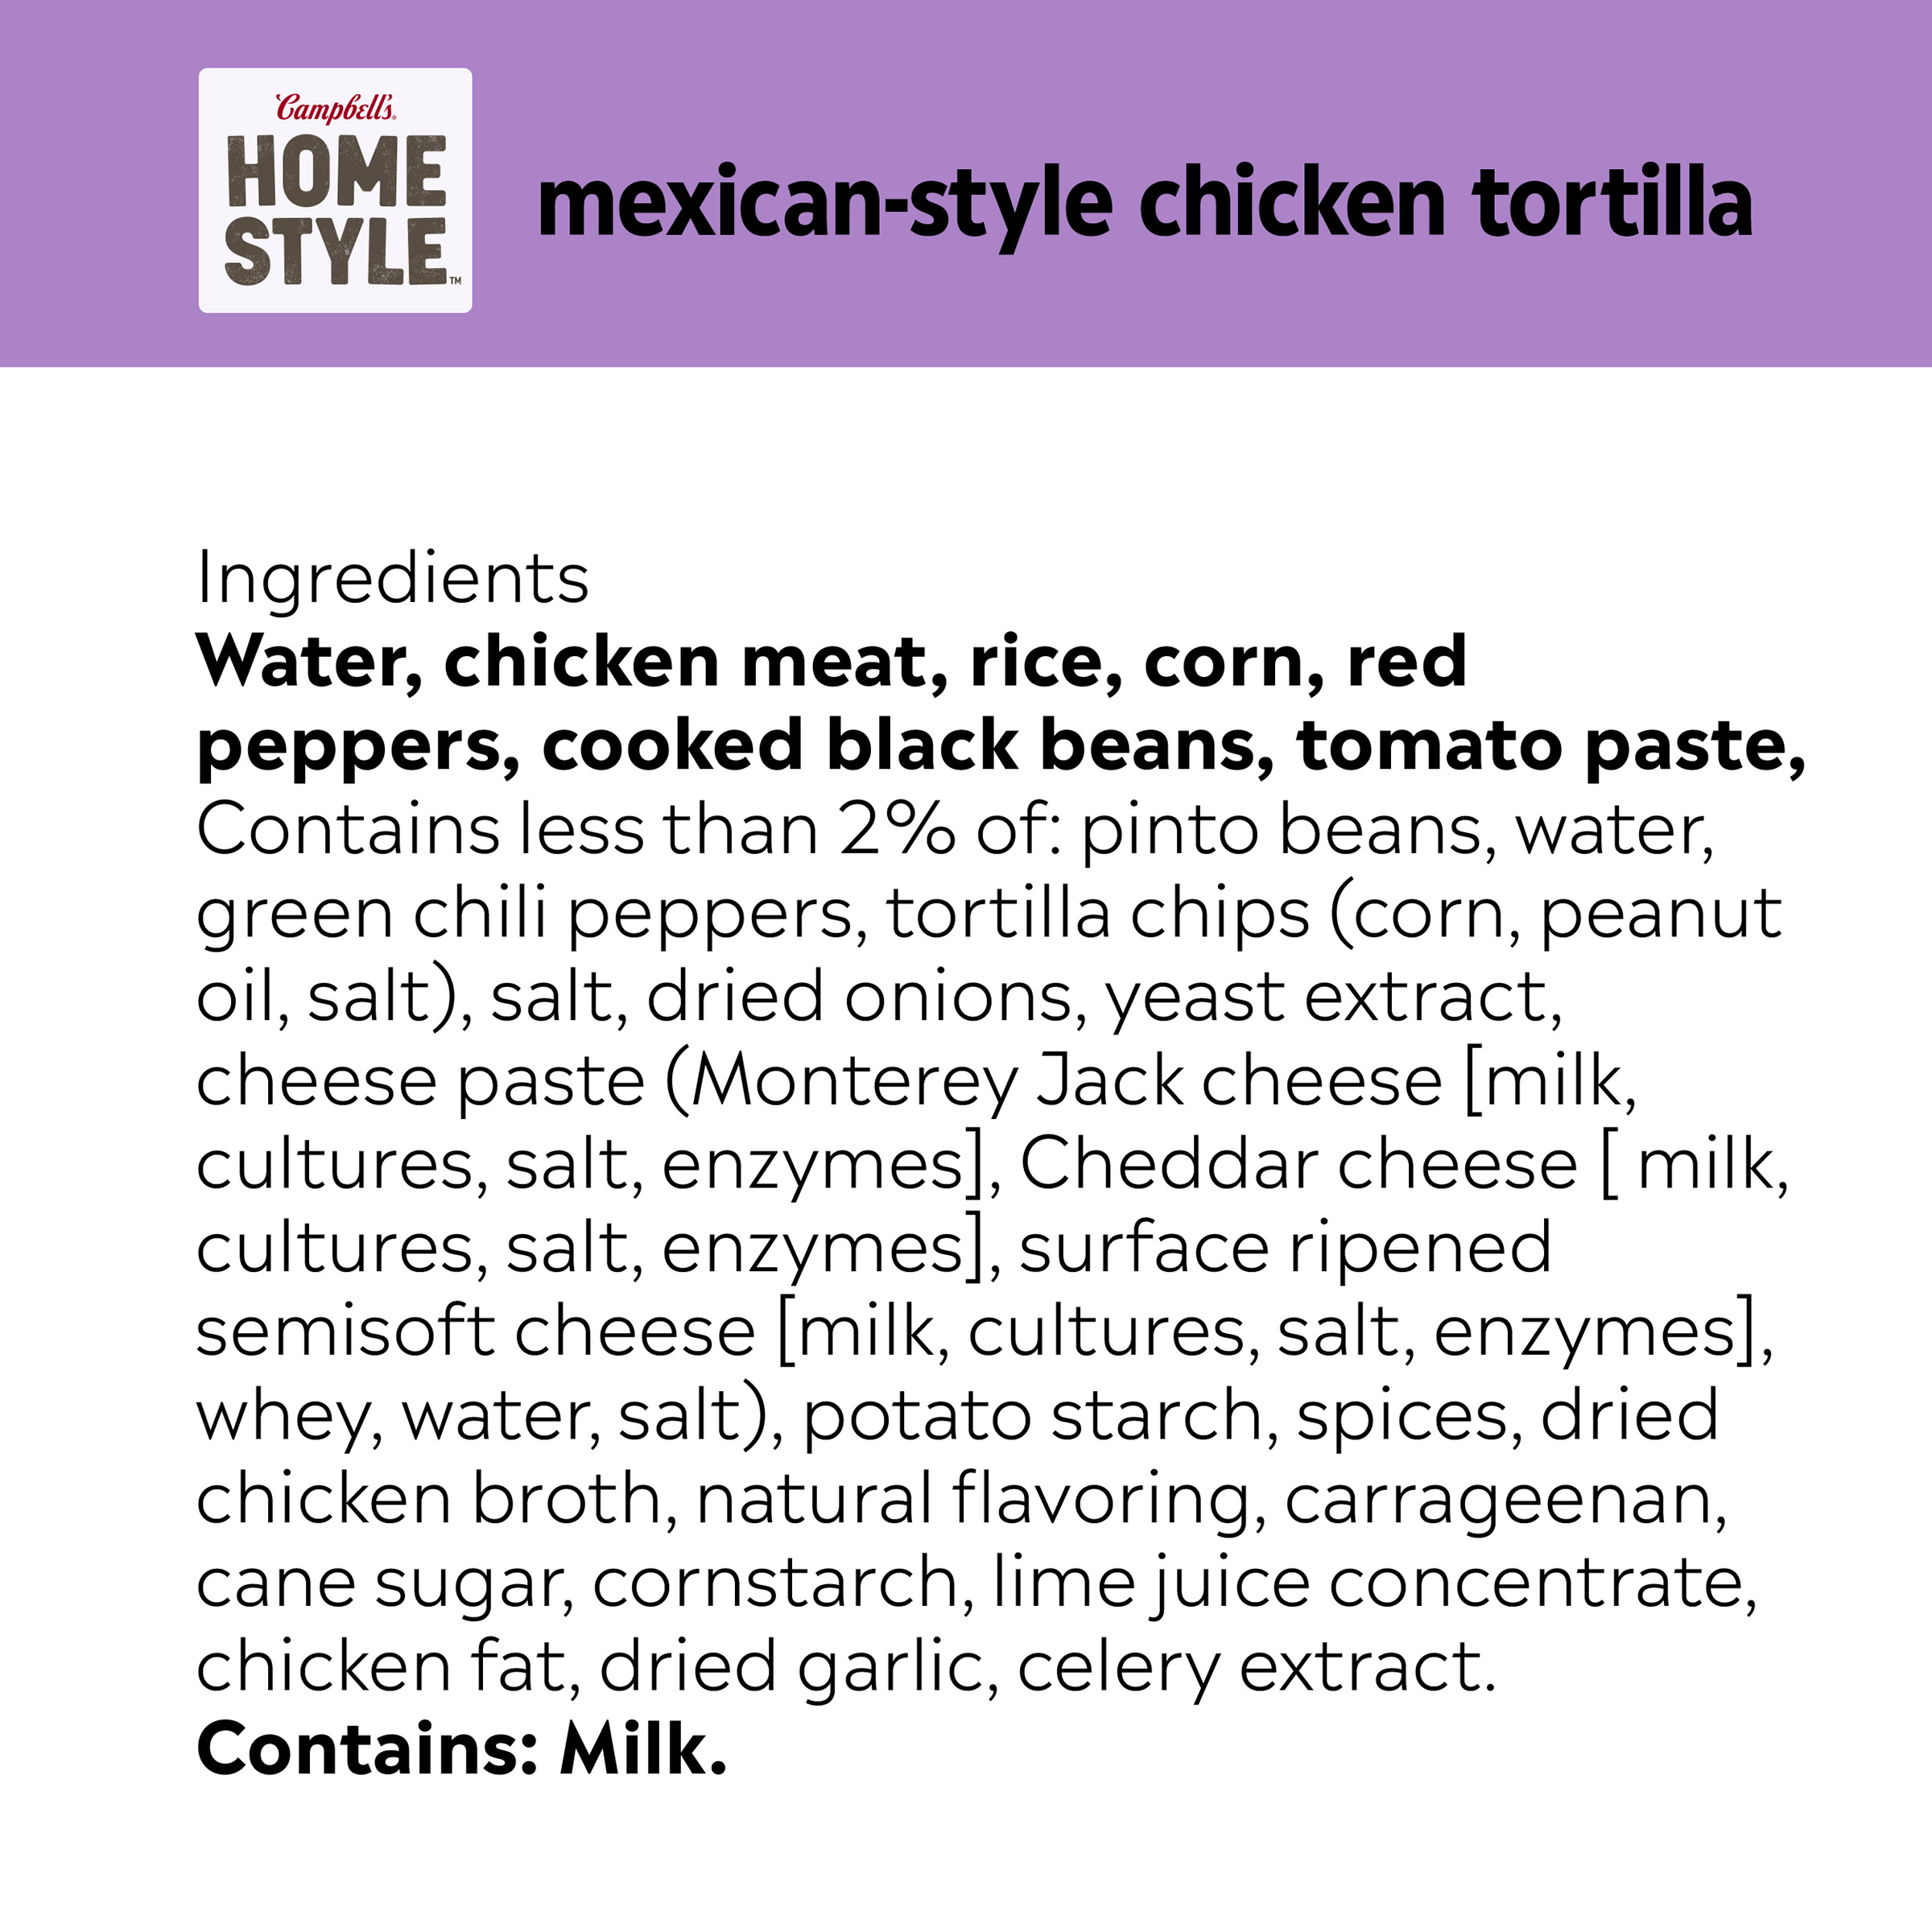 oz　Mexican-Style　Homestyle　16.1　Can　Tortilla　Chicken　Campbell's　Soup,